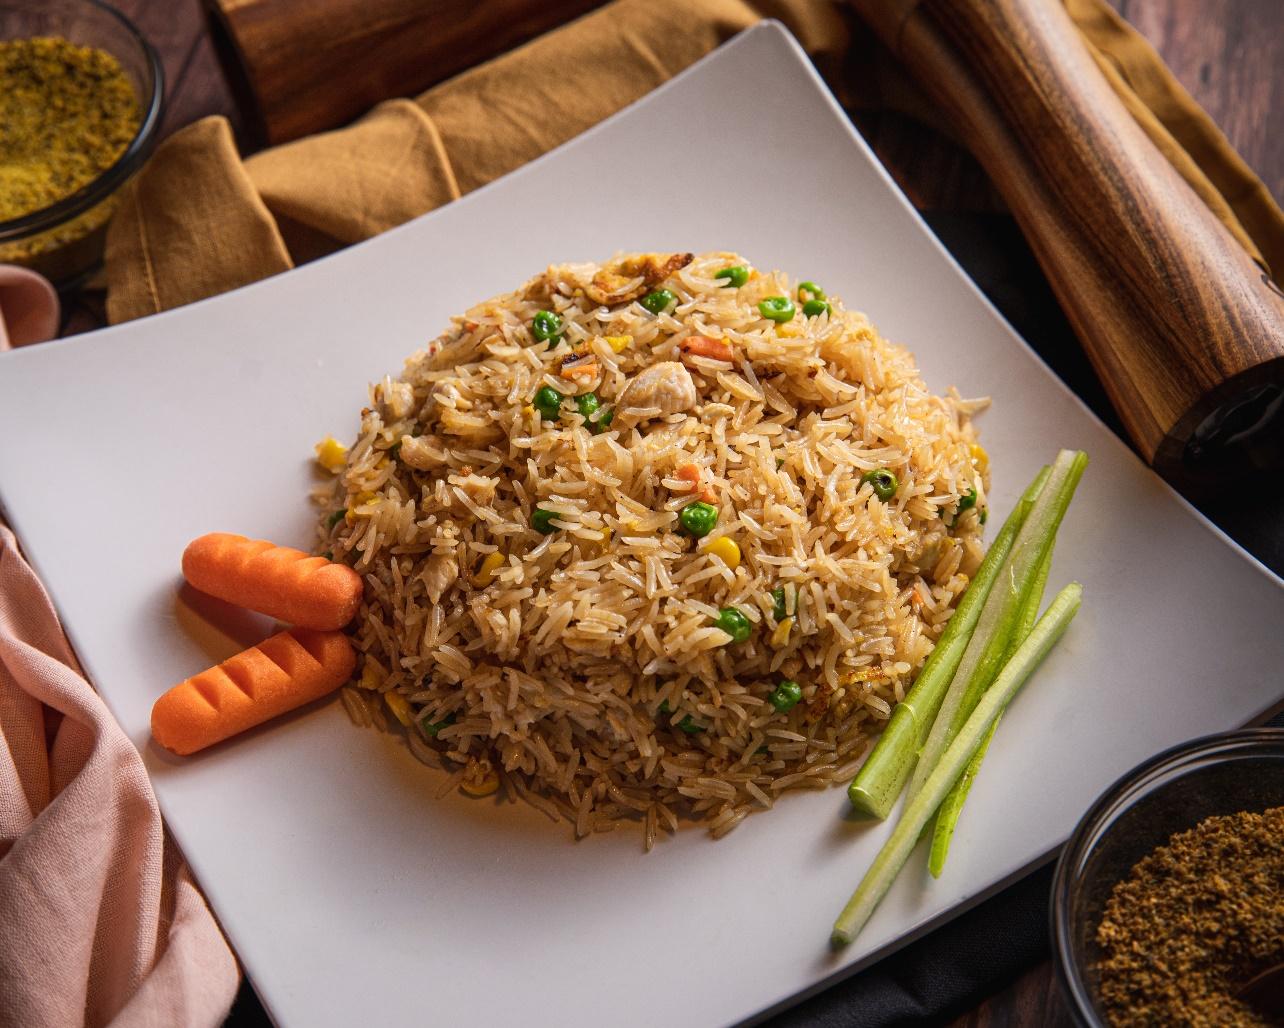 The Real Food Academy Miami's vegetable fried rice recipe.